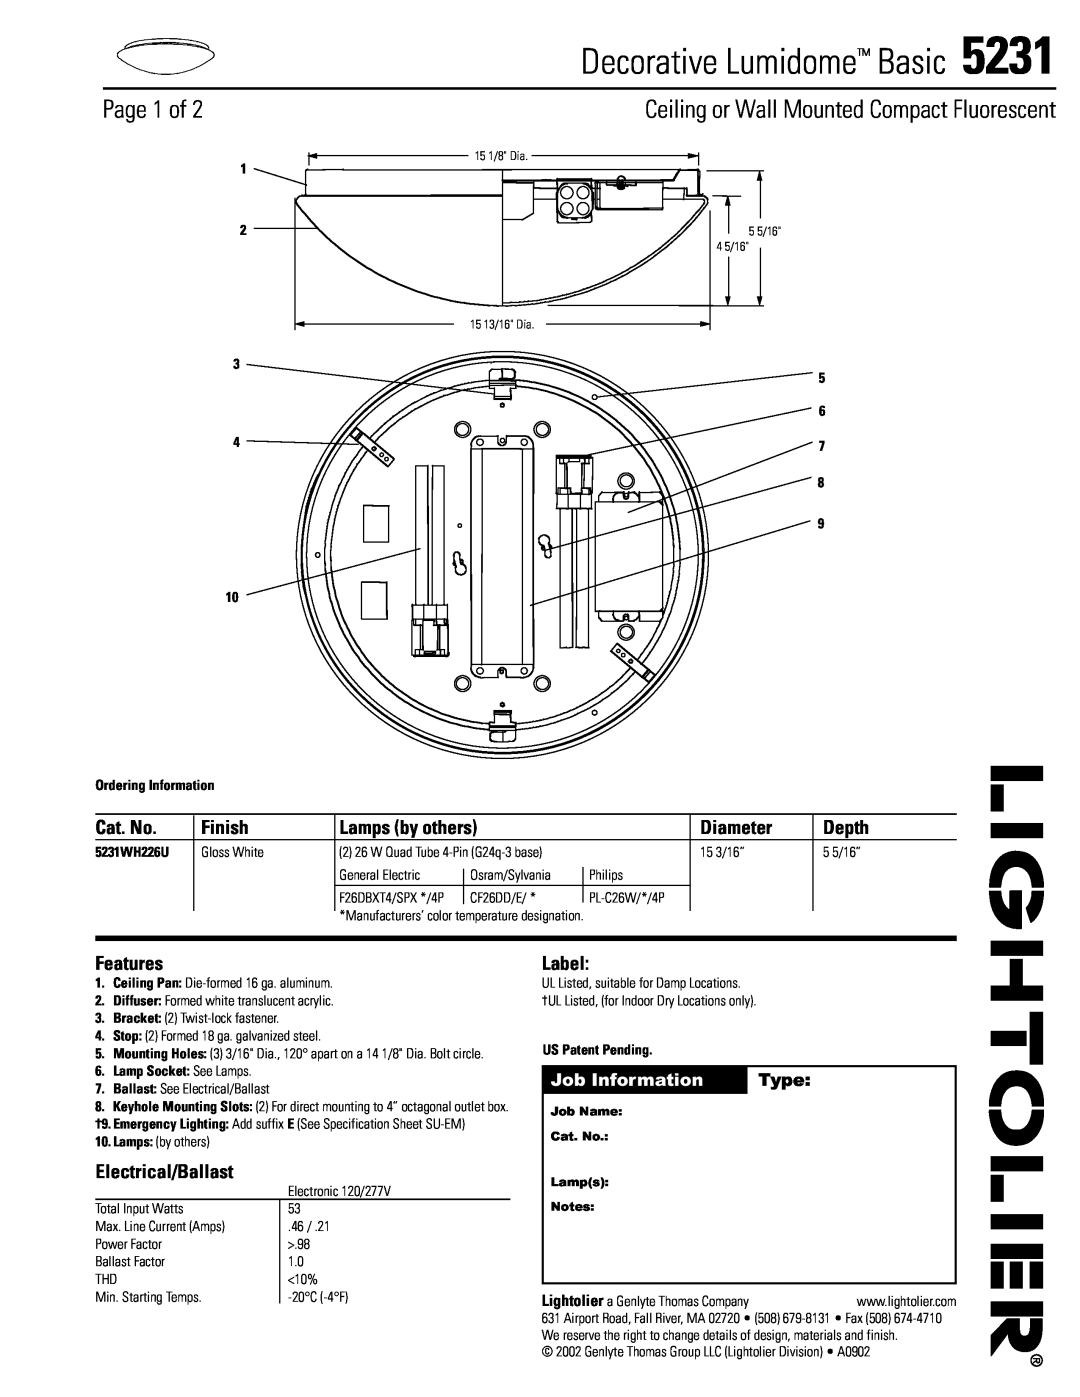 Lightolier 5231 specifications Decorative Lumidome Basic, Page 1 of, Ceiling or Wall Mounted Compact Fluorescent, Type 